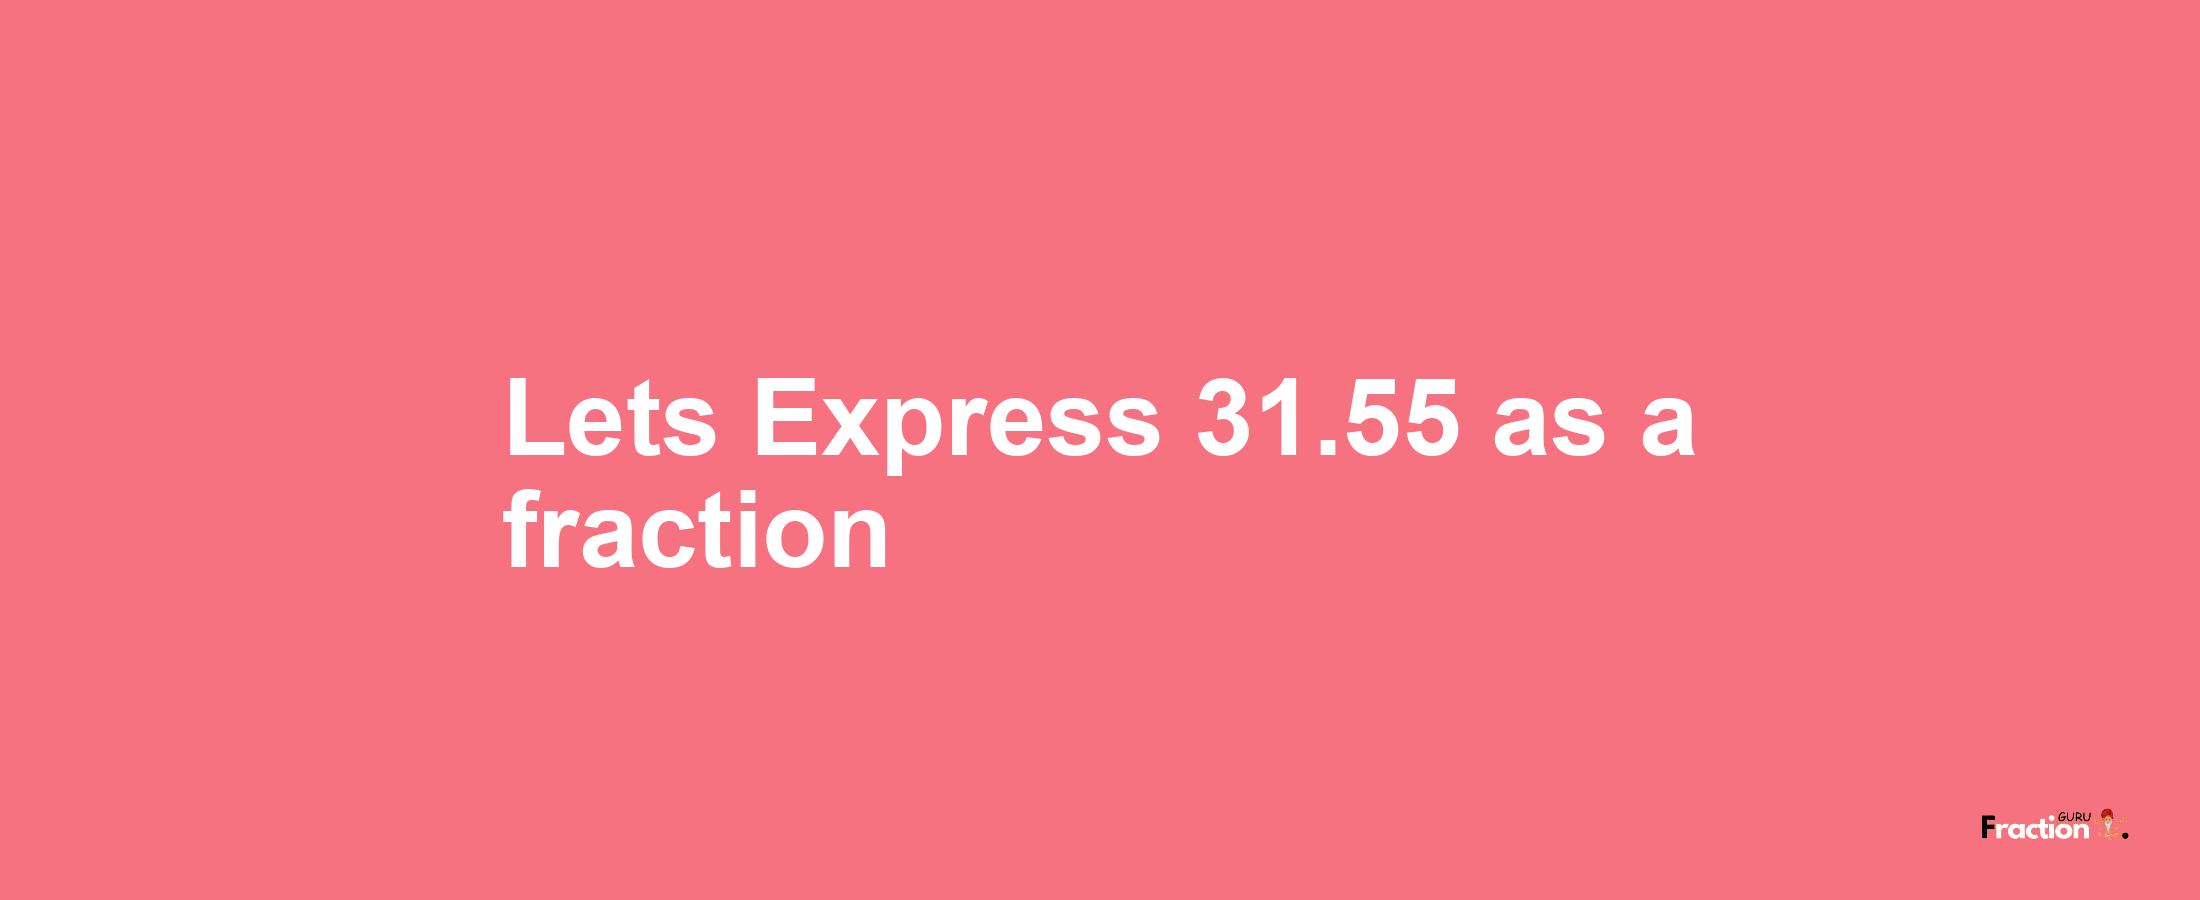 Lets Express 31.55 as afraction